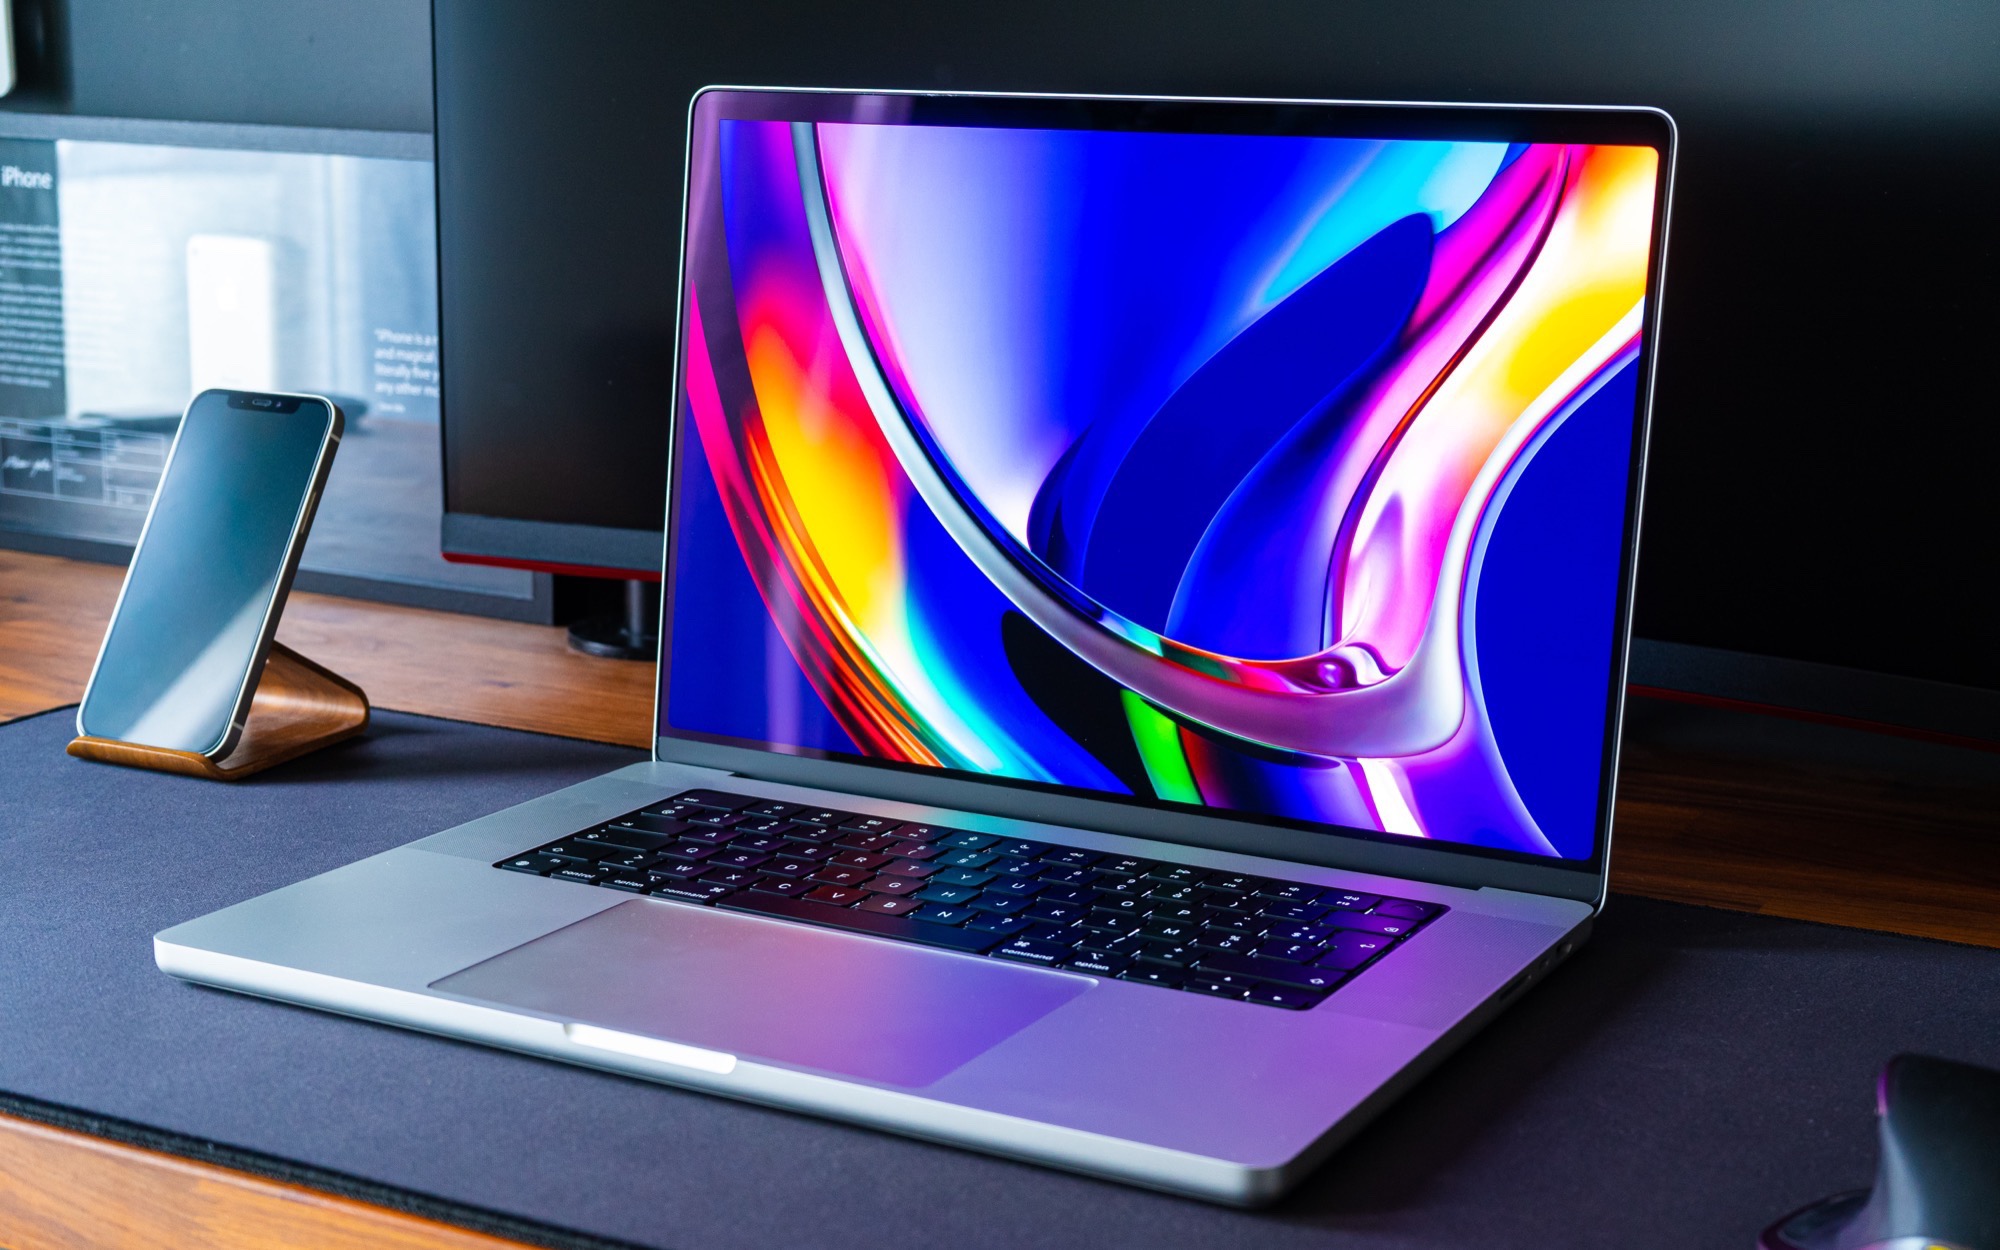 will there be a 17 macbook pro with retina display